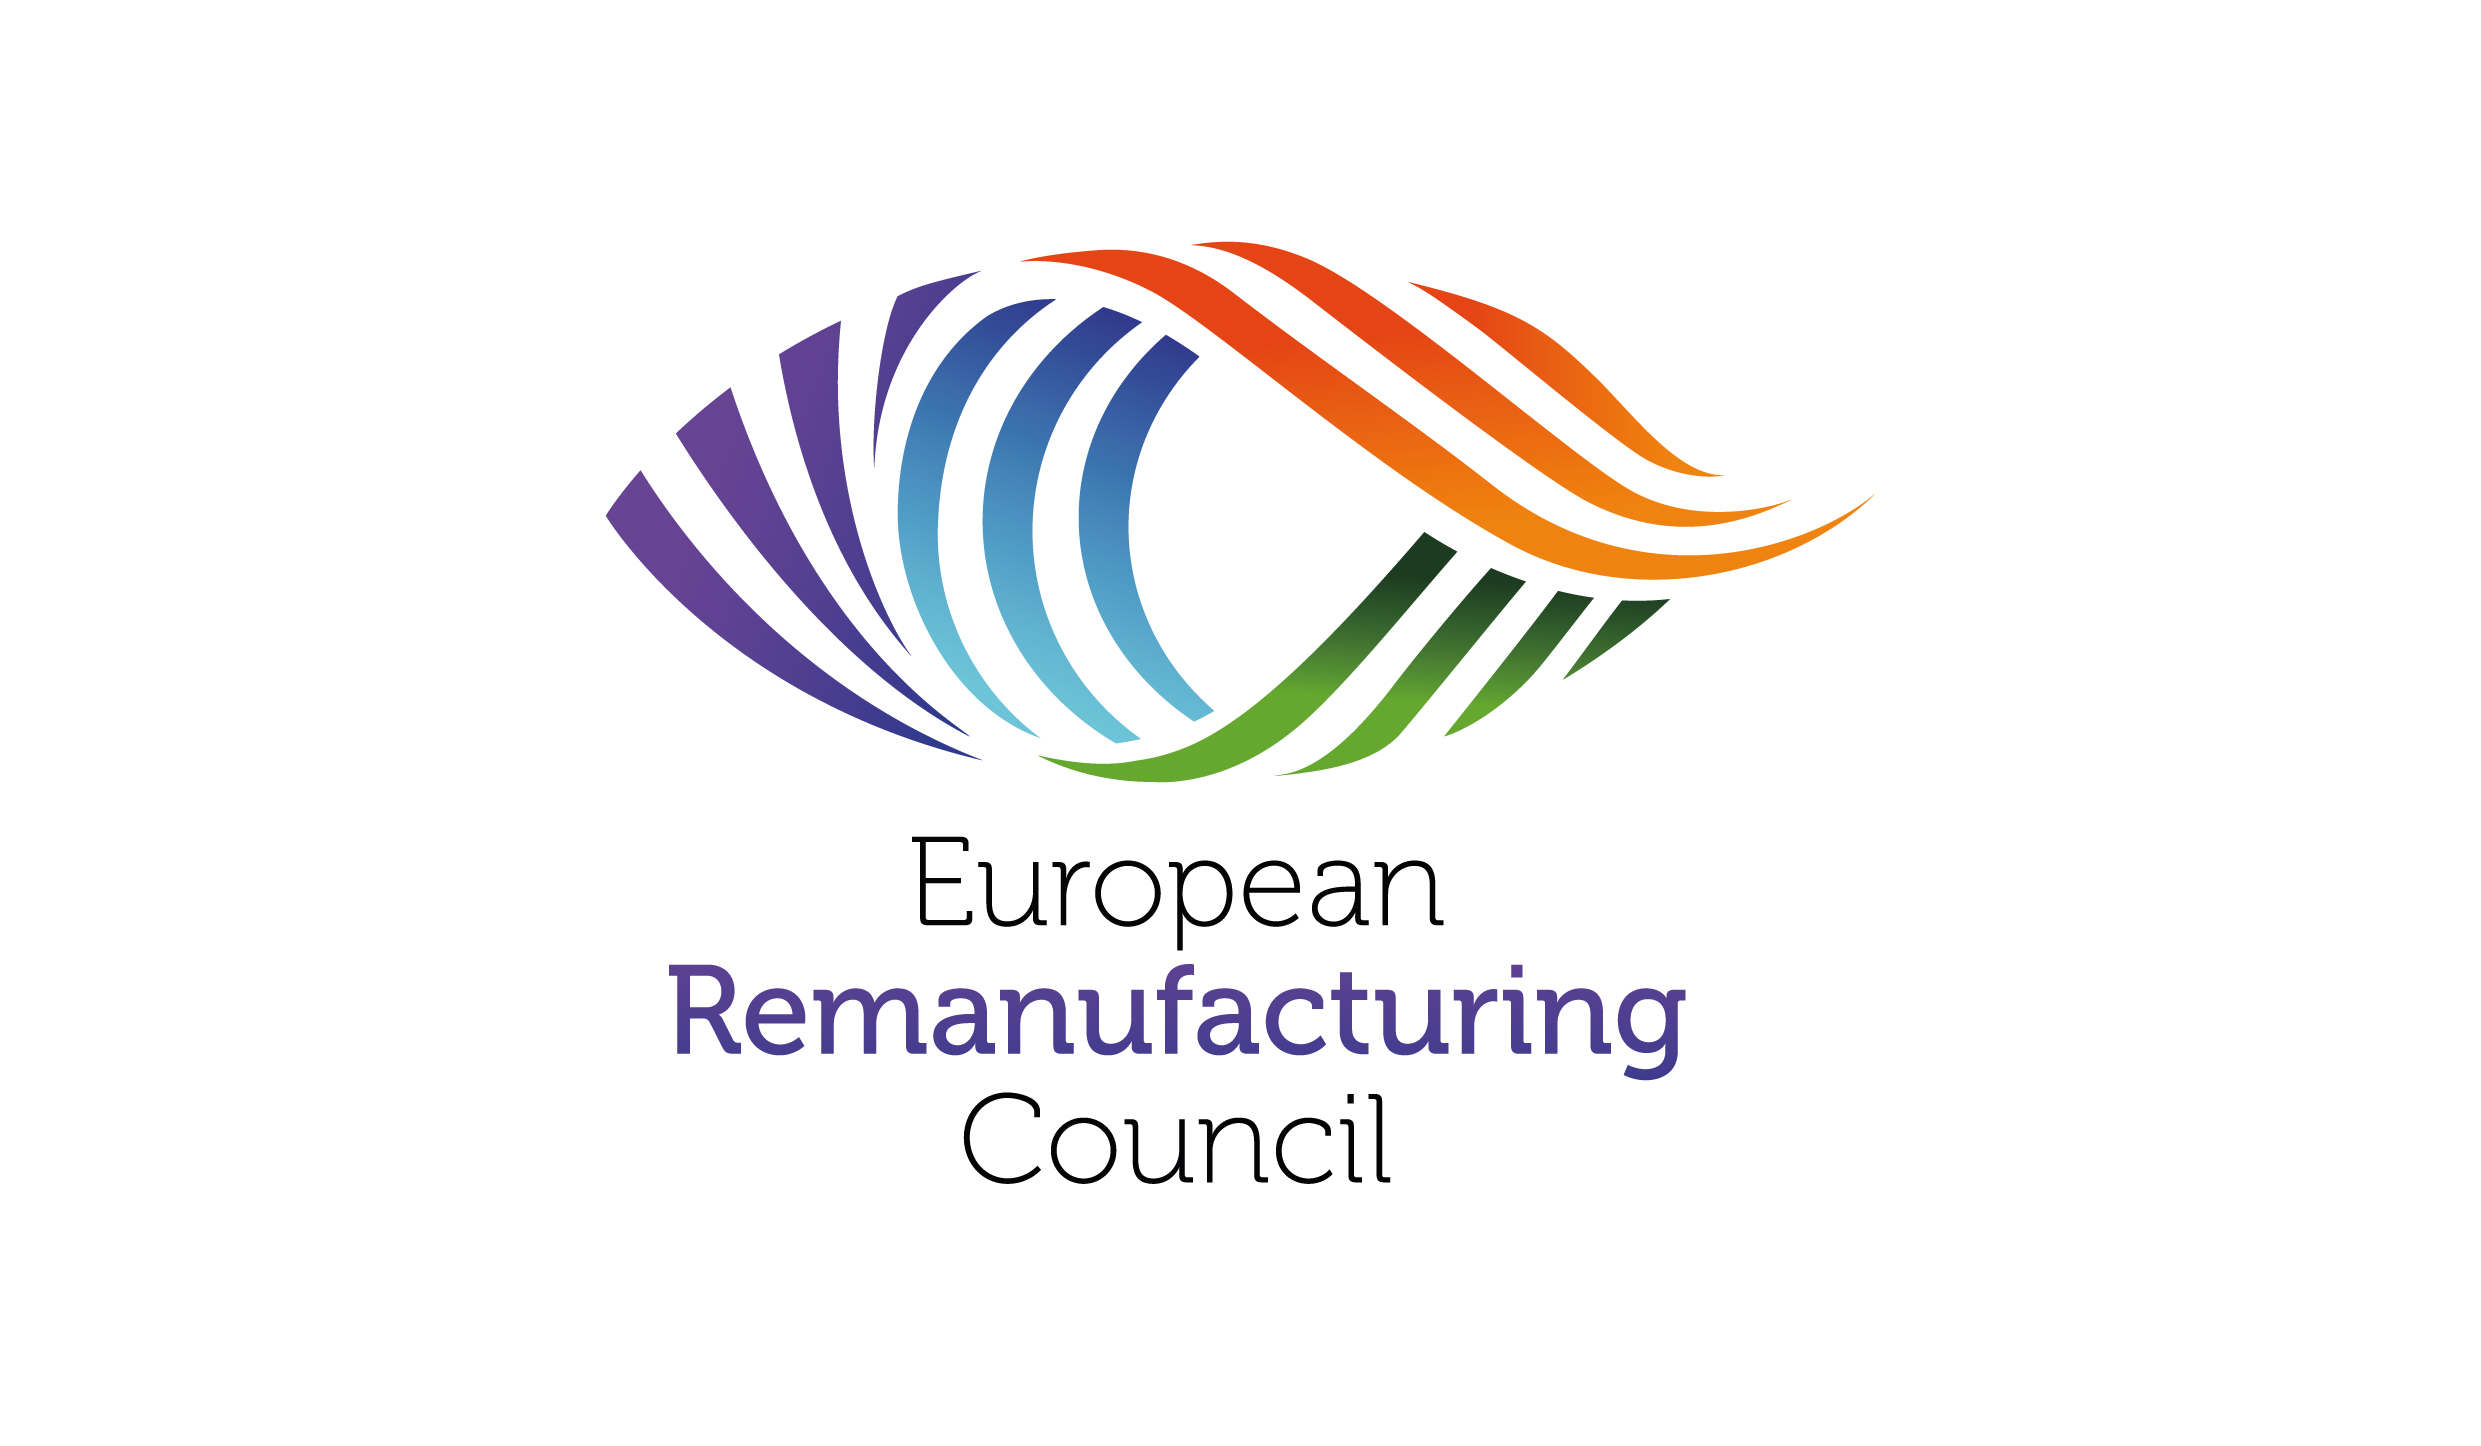 Remanufacturing Council